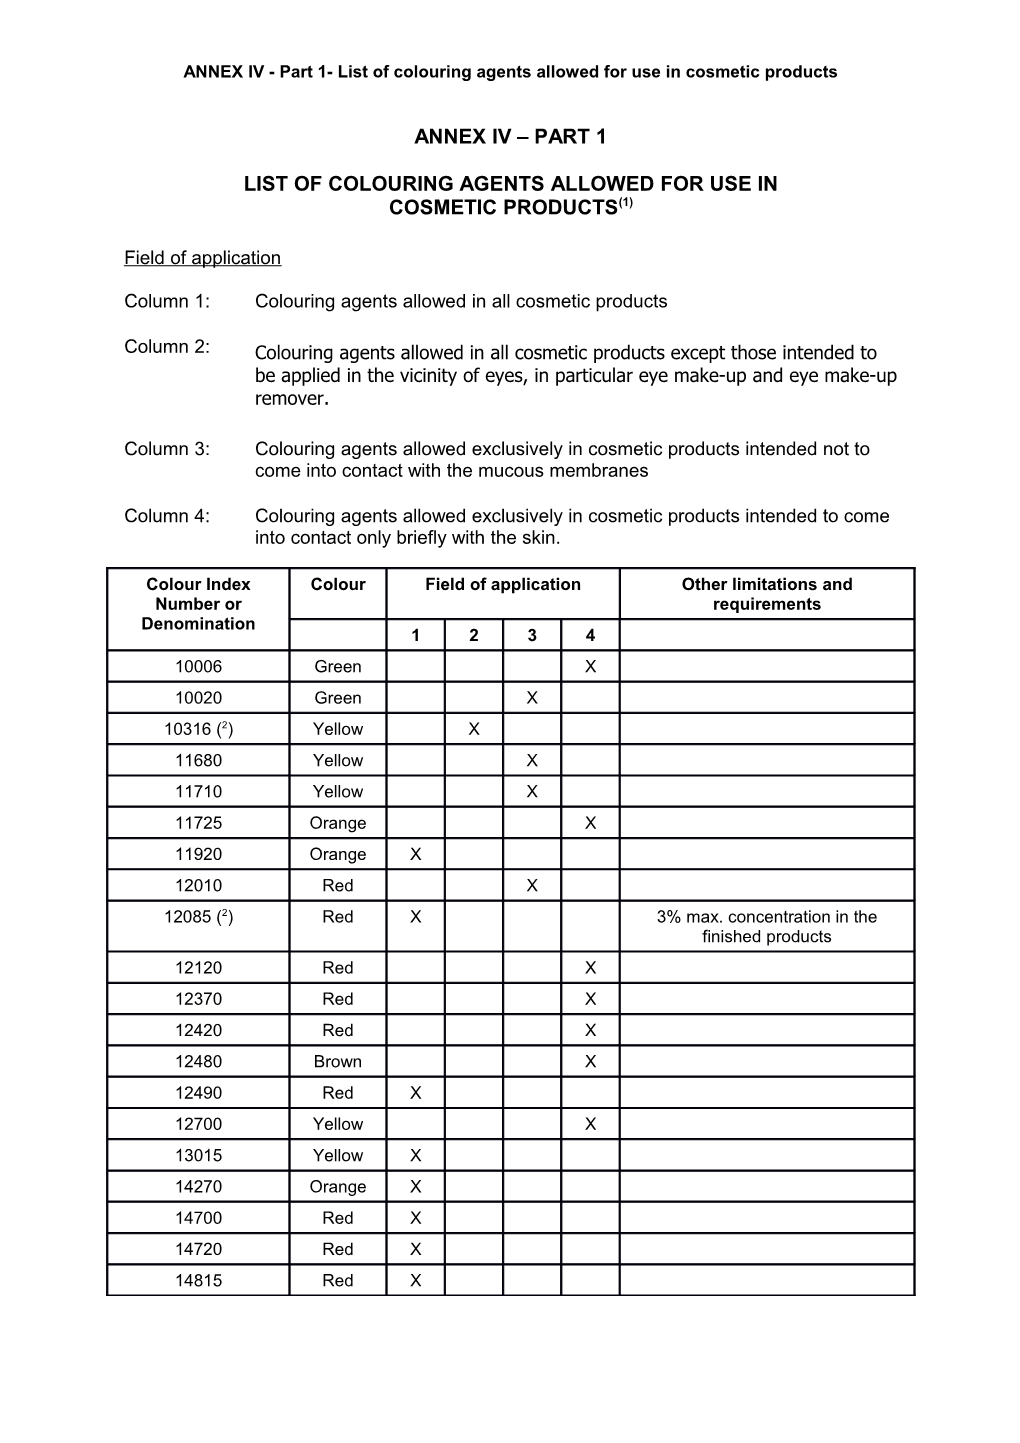 ANNEX IV - Part 1-List of Colouring Agents Allowed for Use in Cosmetic Products